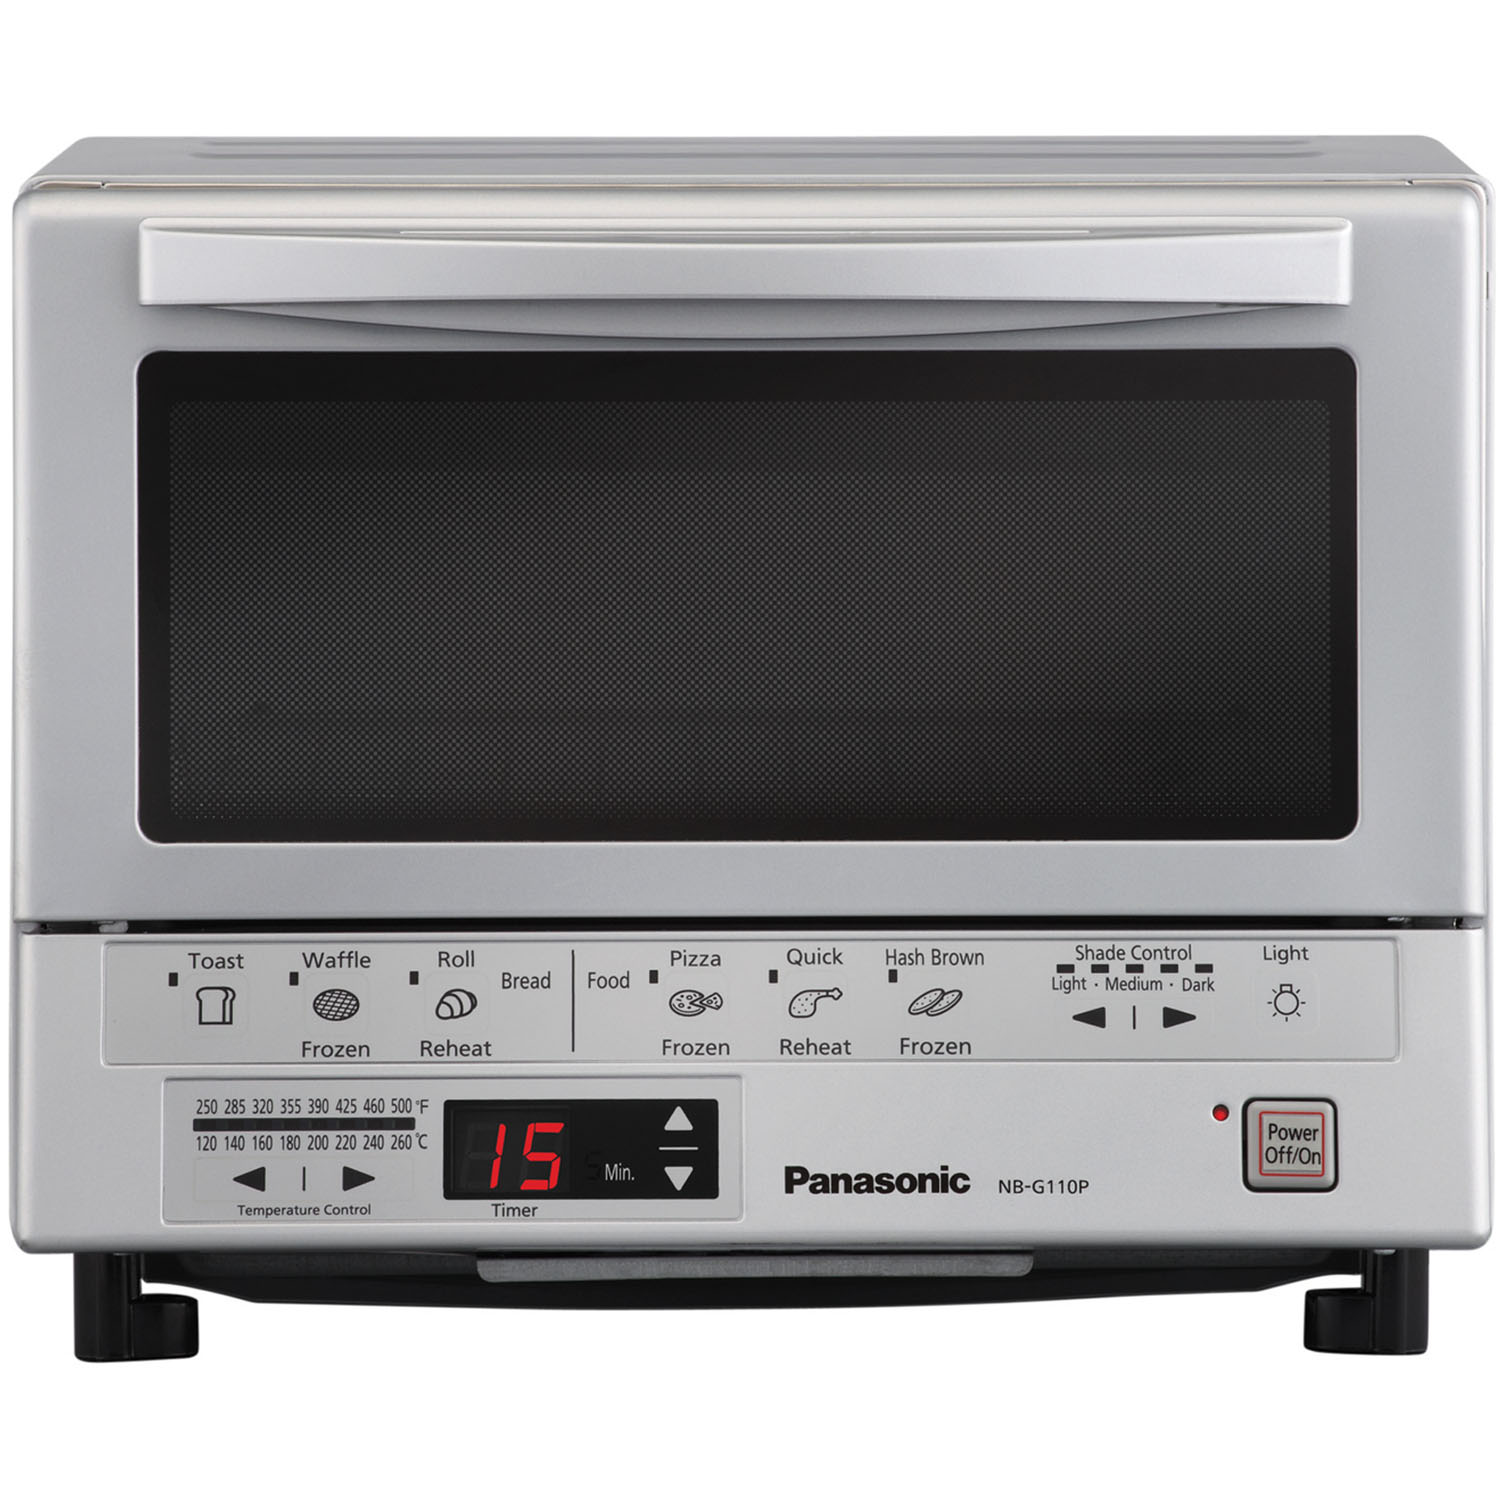 Panasonic FlashXpress Silver Toaster Oven in Silver - image 1 of 9